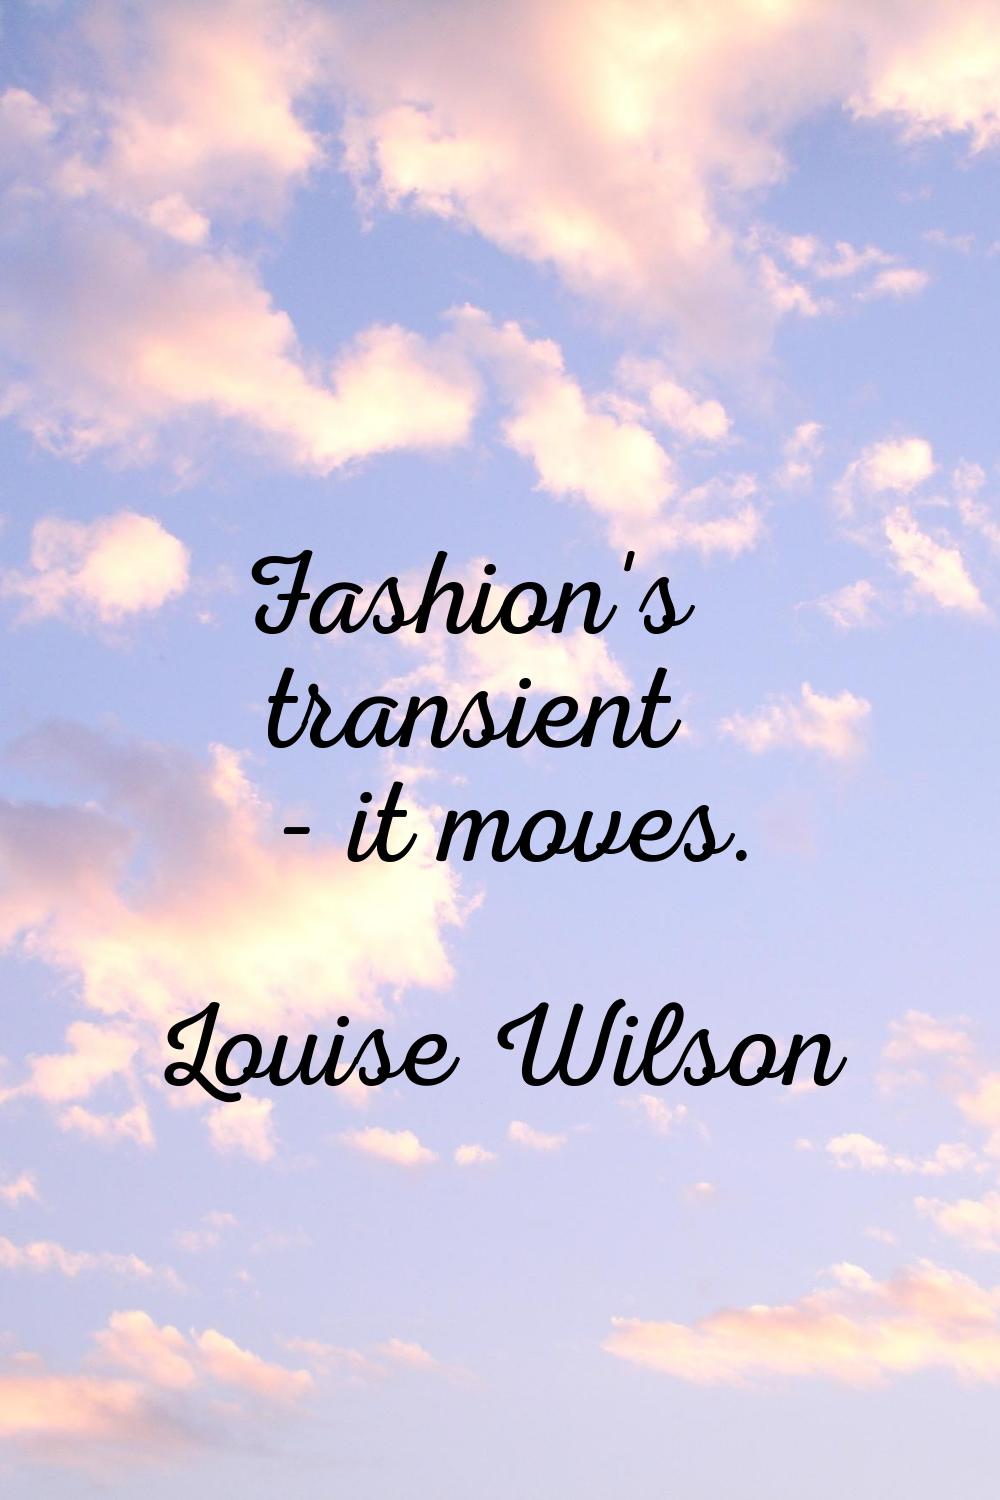 Fashion's transient - it moves.